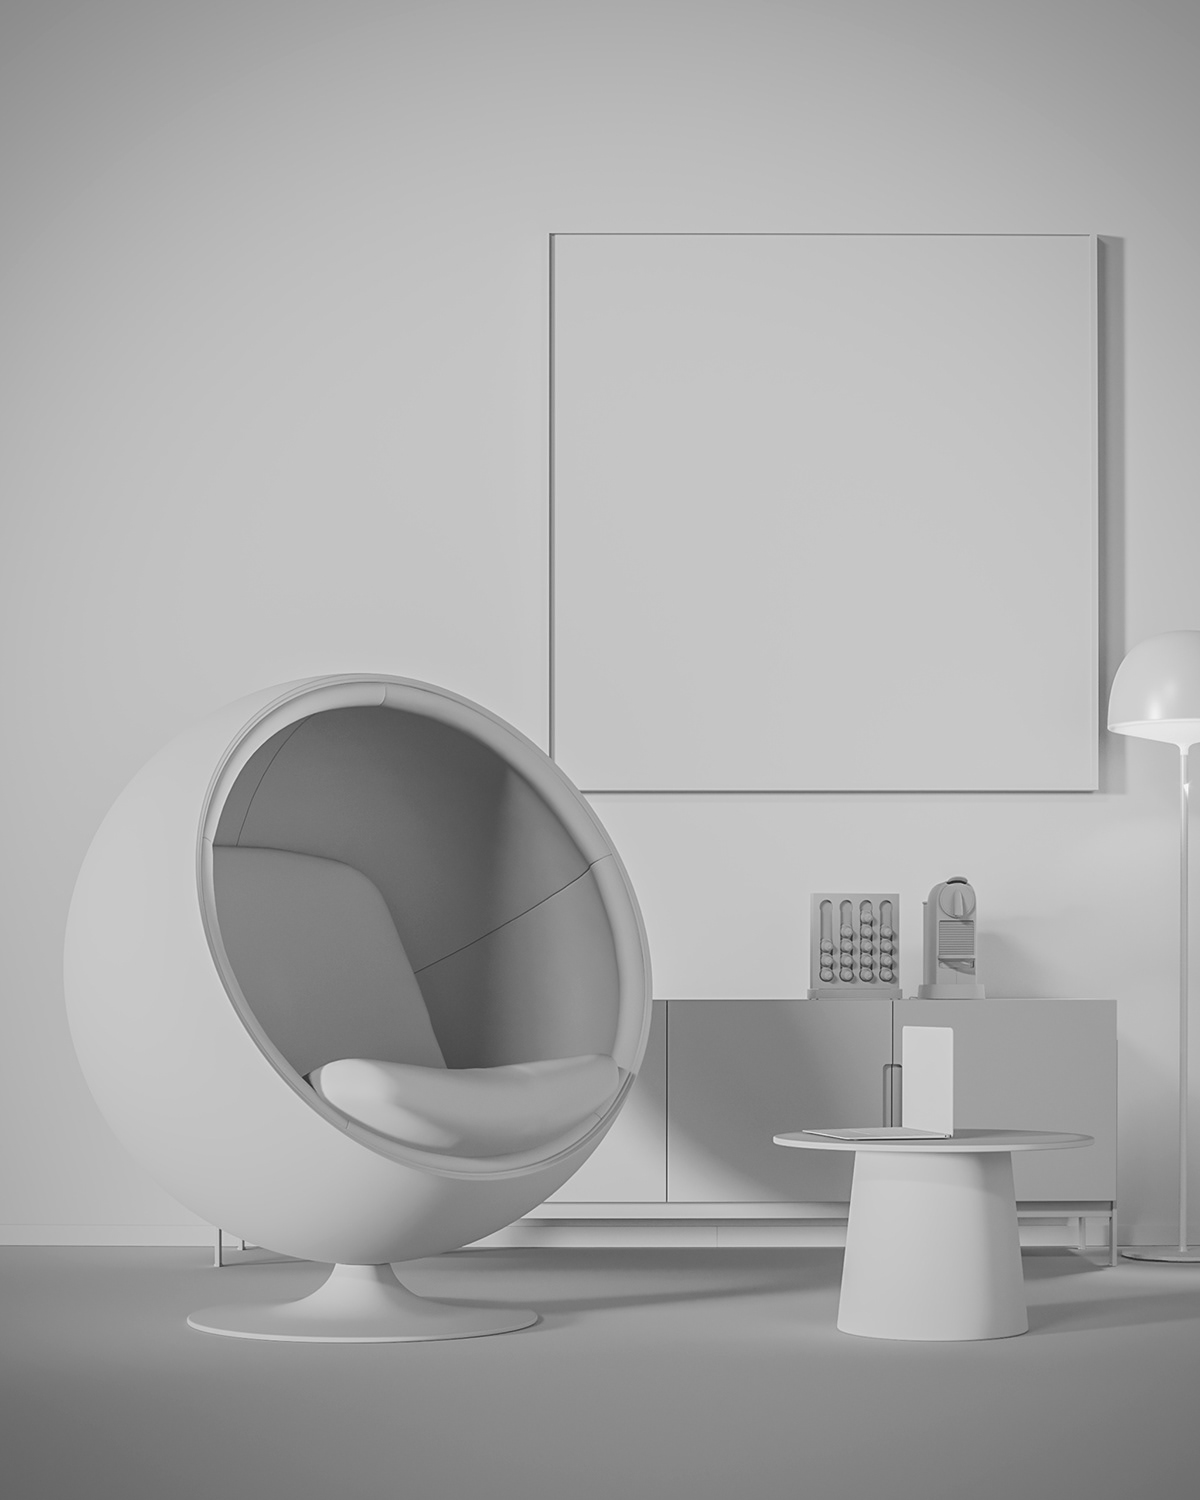 3ds max ball chair concrete corona renderer decoration eero aarnio furniture photoshop wood Françoise Nielly